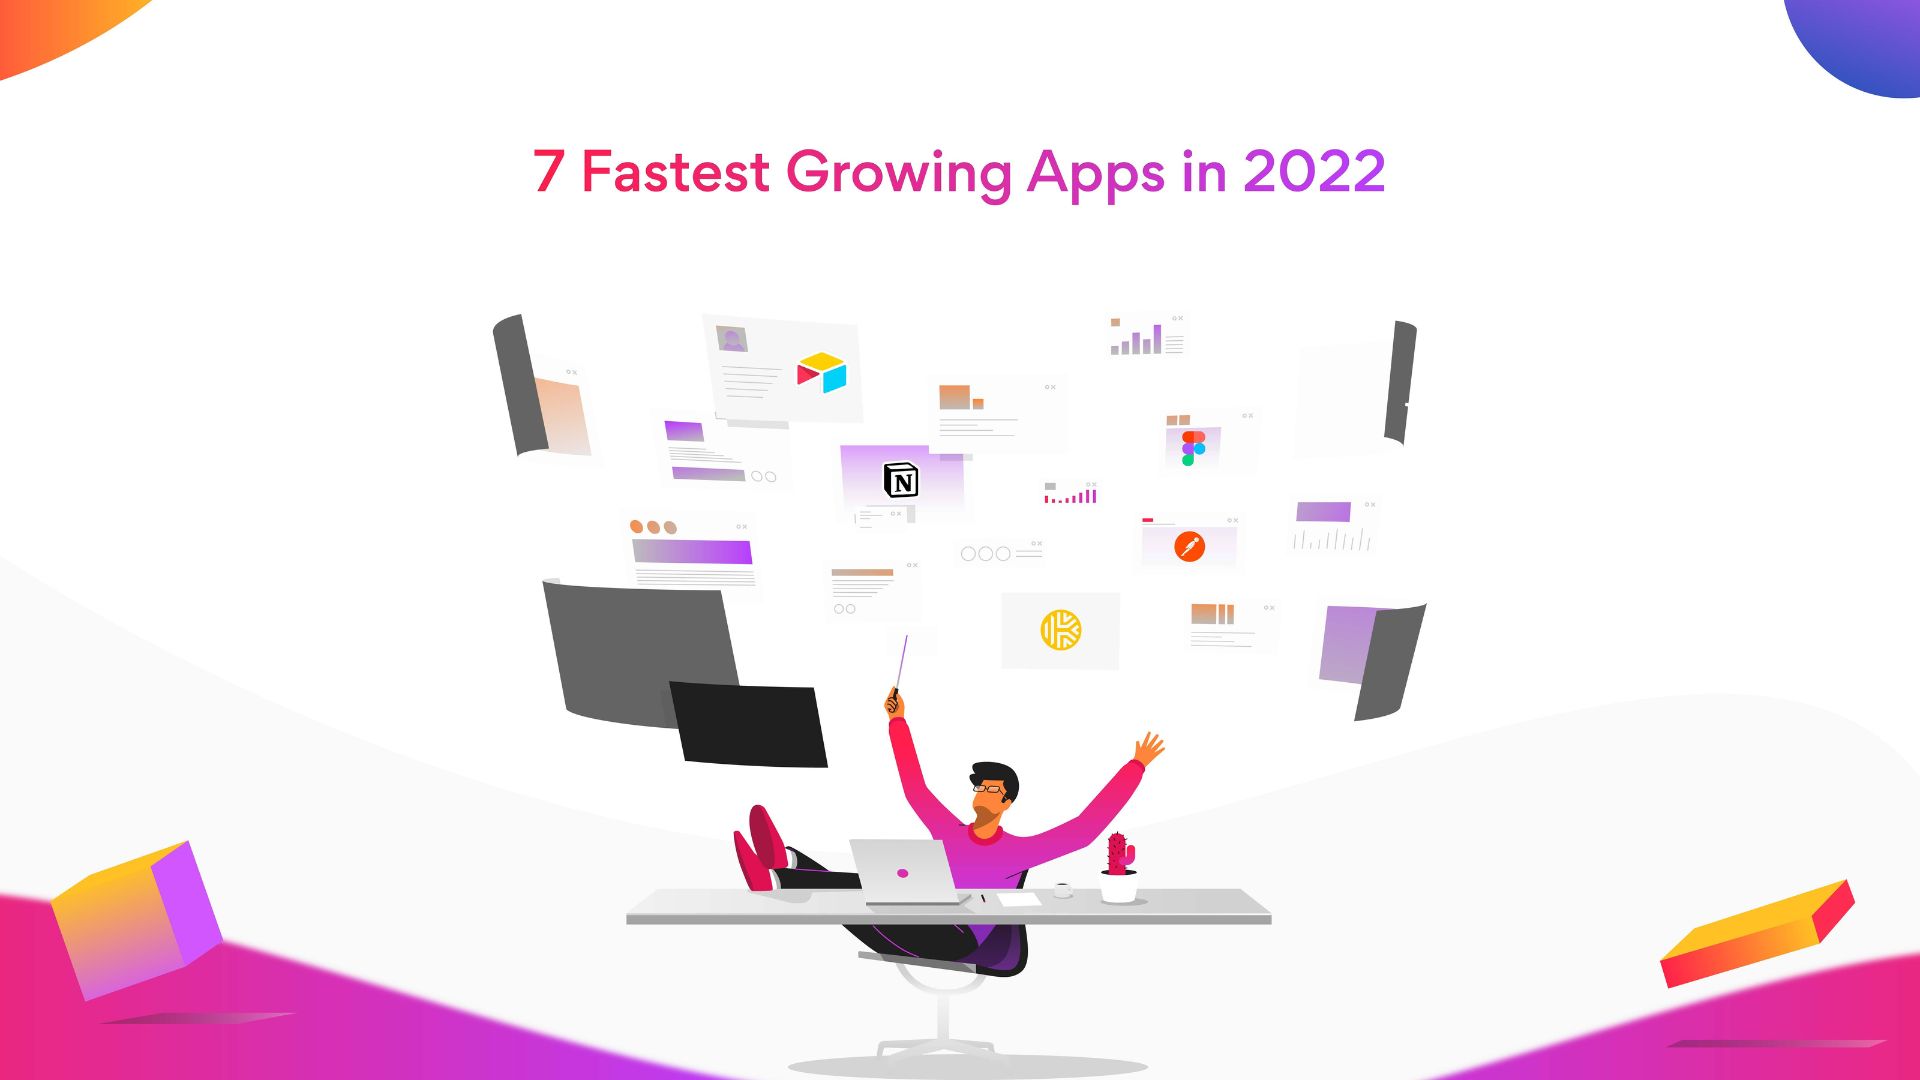 Fastest growing apps in 2022